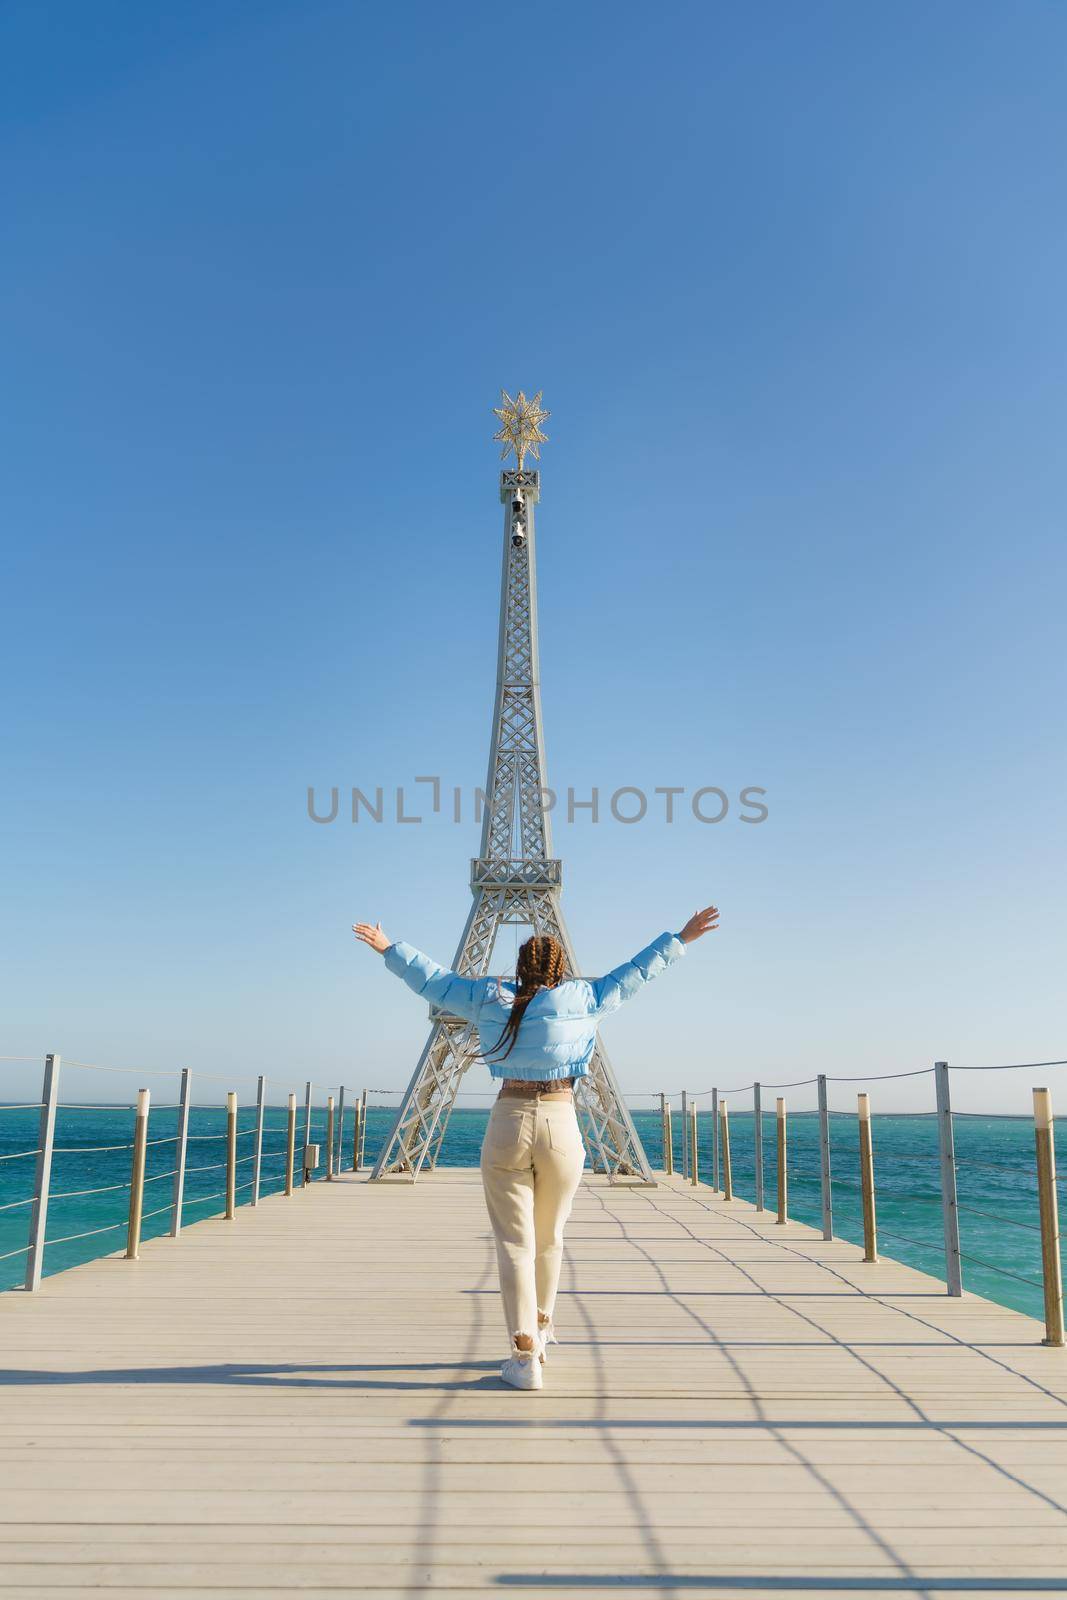 Large model of the Eiffel Tower on the beach. A woman walks along the pier towards the tower, wearing a blue jacket and white jeans. by Matiunina